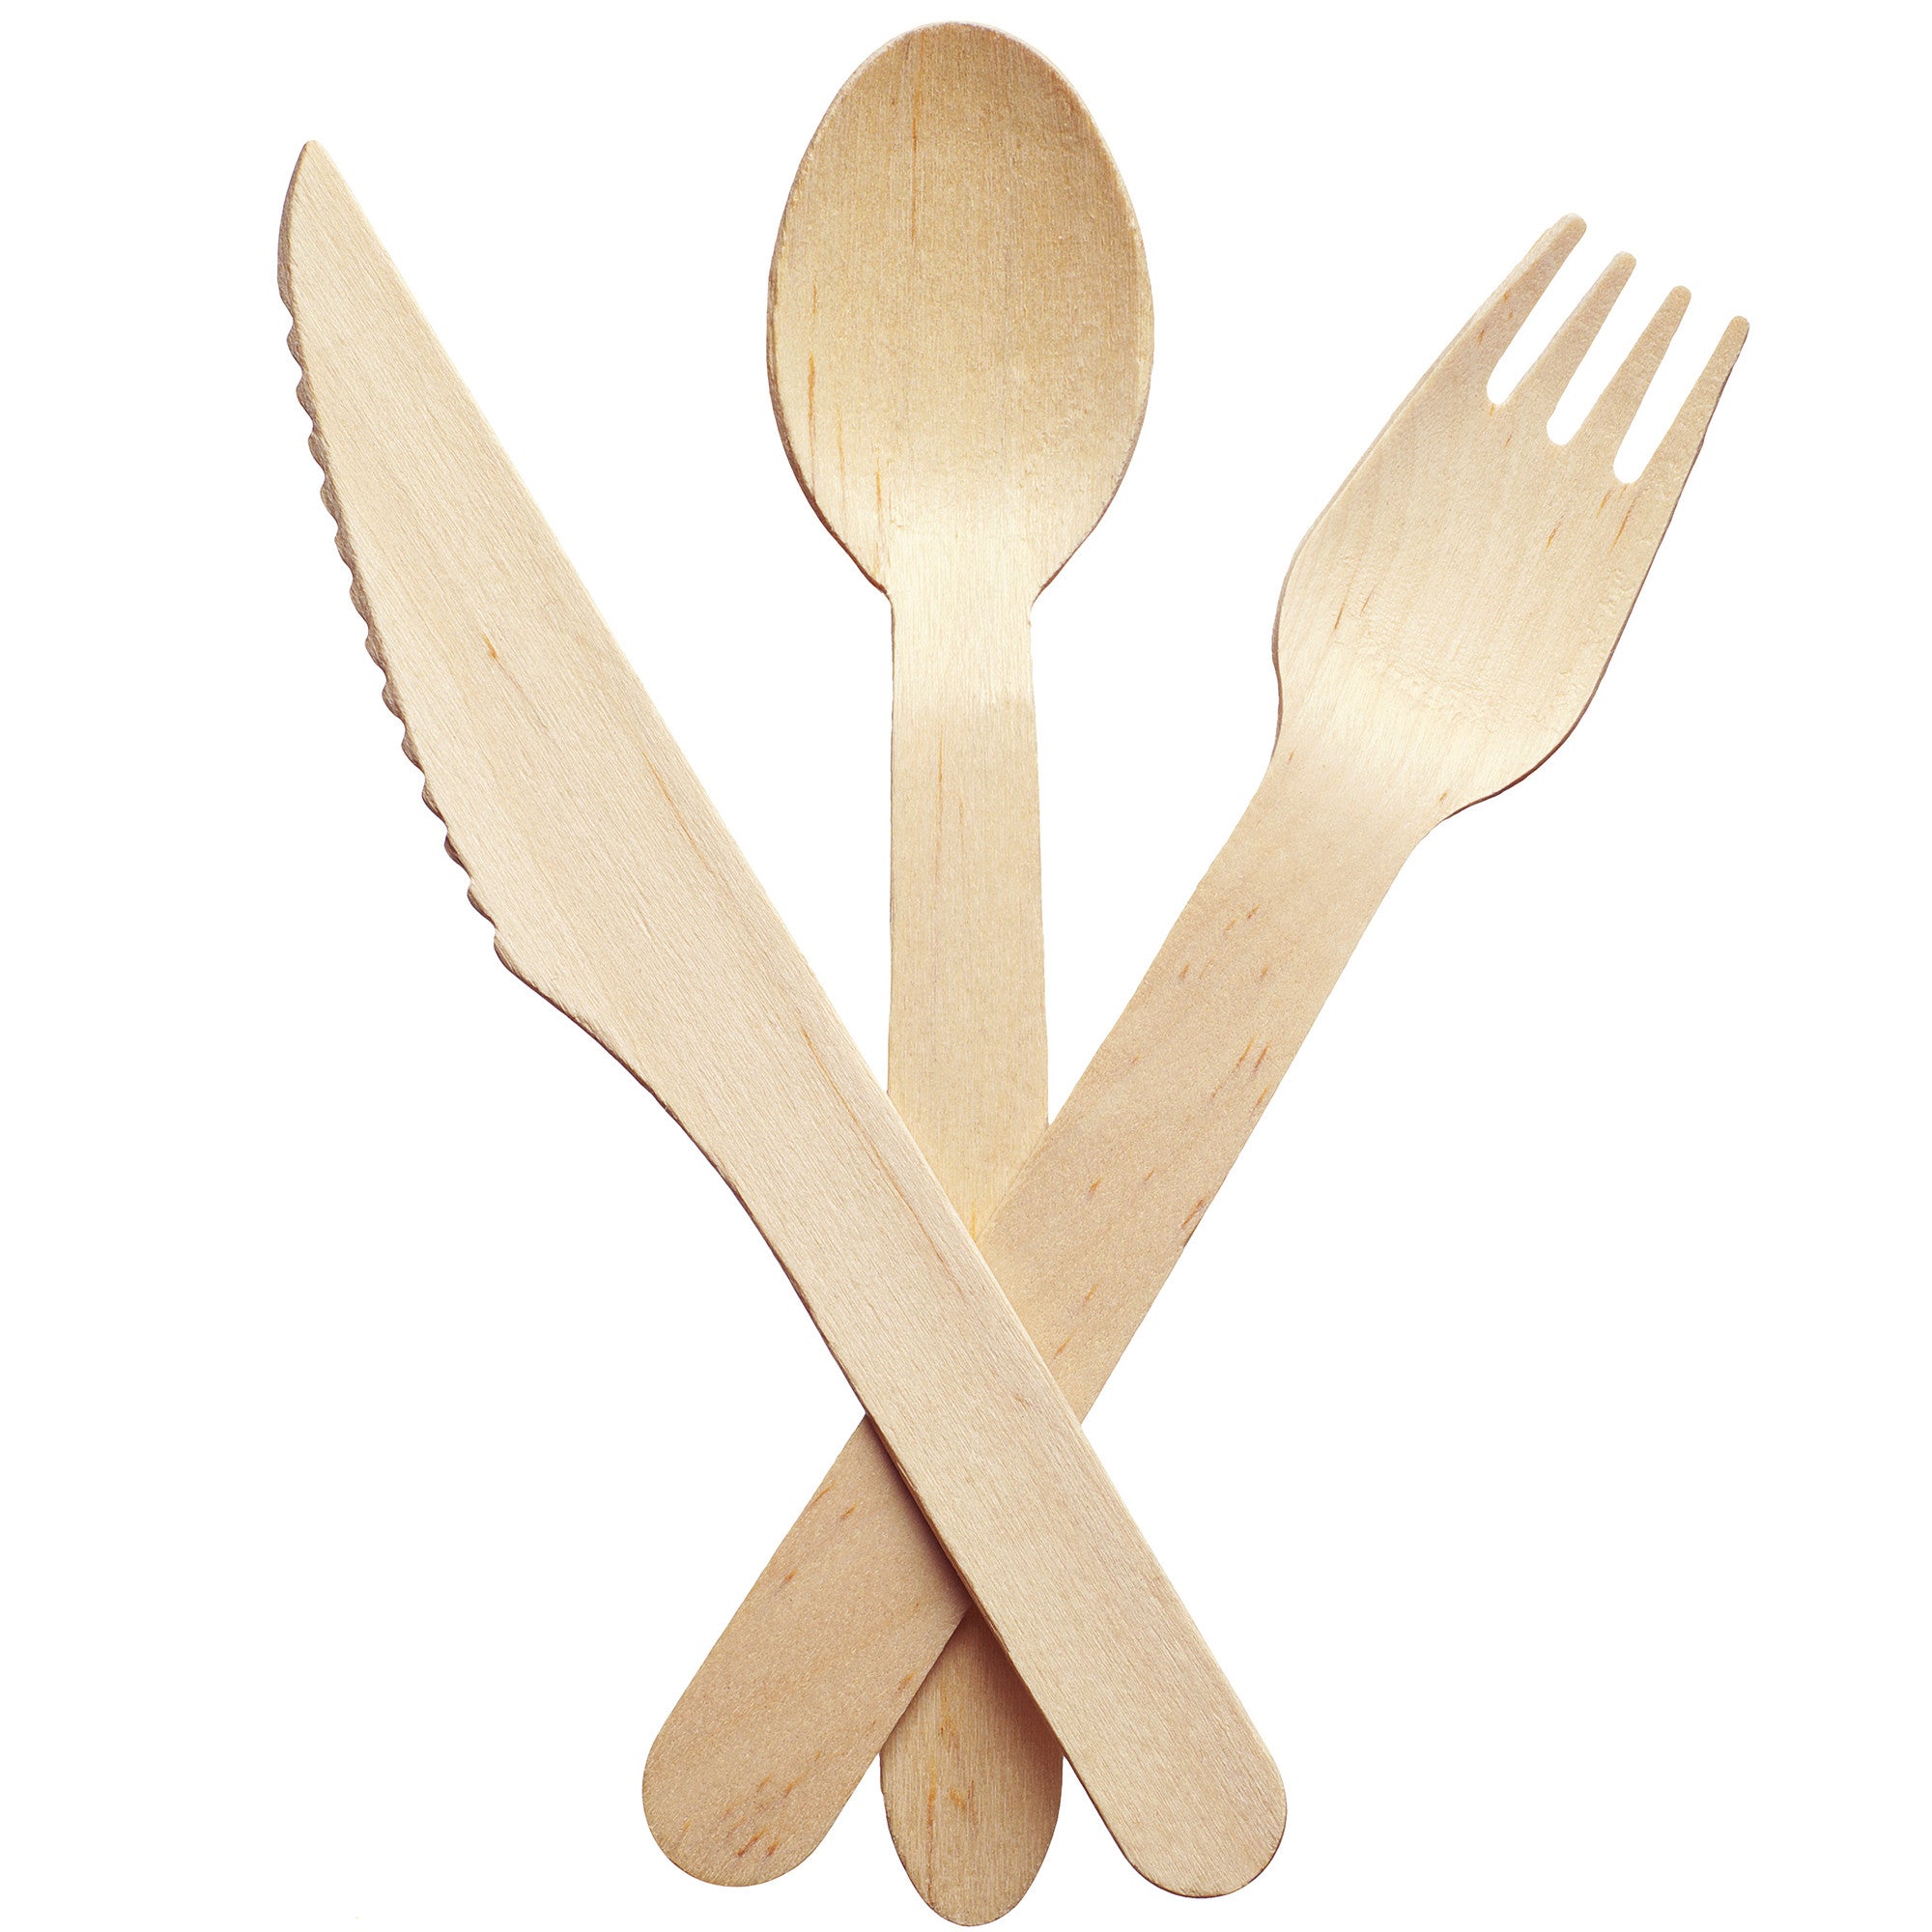 Disposable Wooden Cutlery | 250pc Set w/100 Spoons; 100 Forks; 50 Knives | Great for Parties